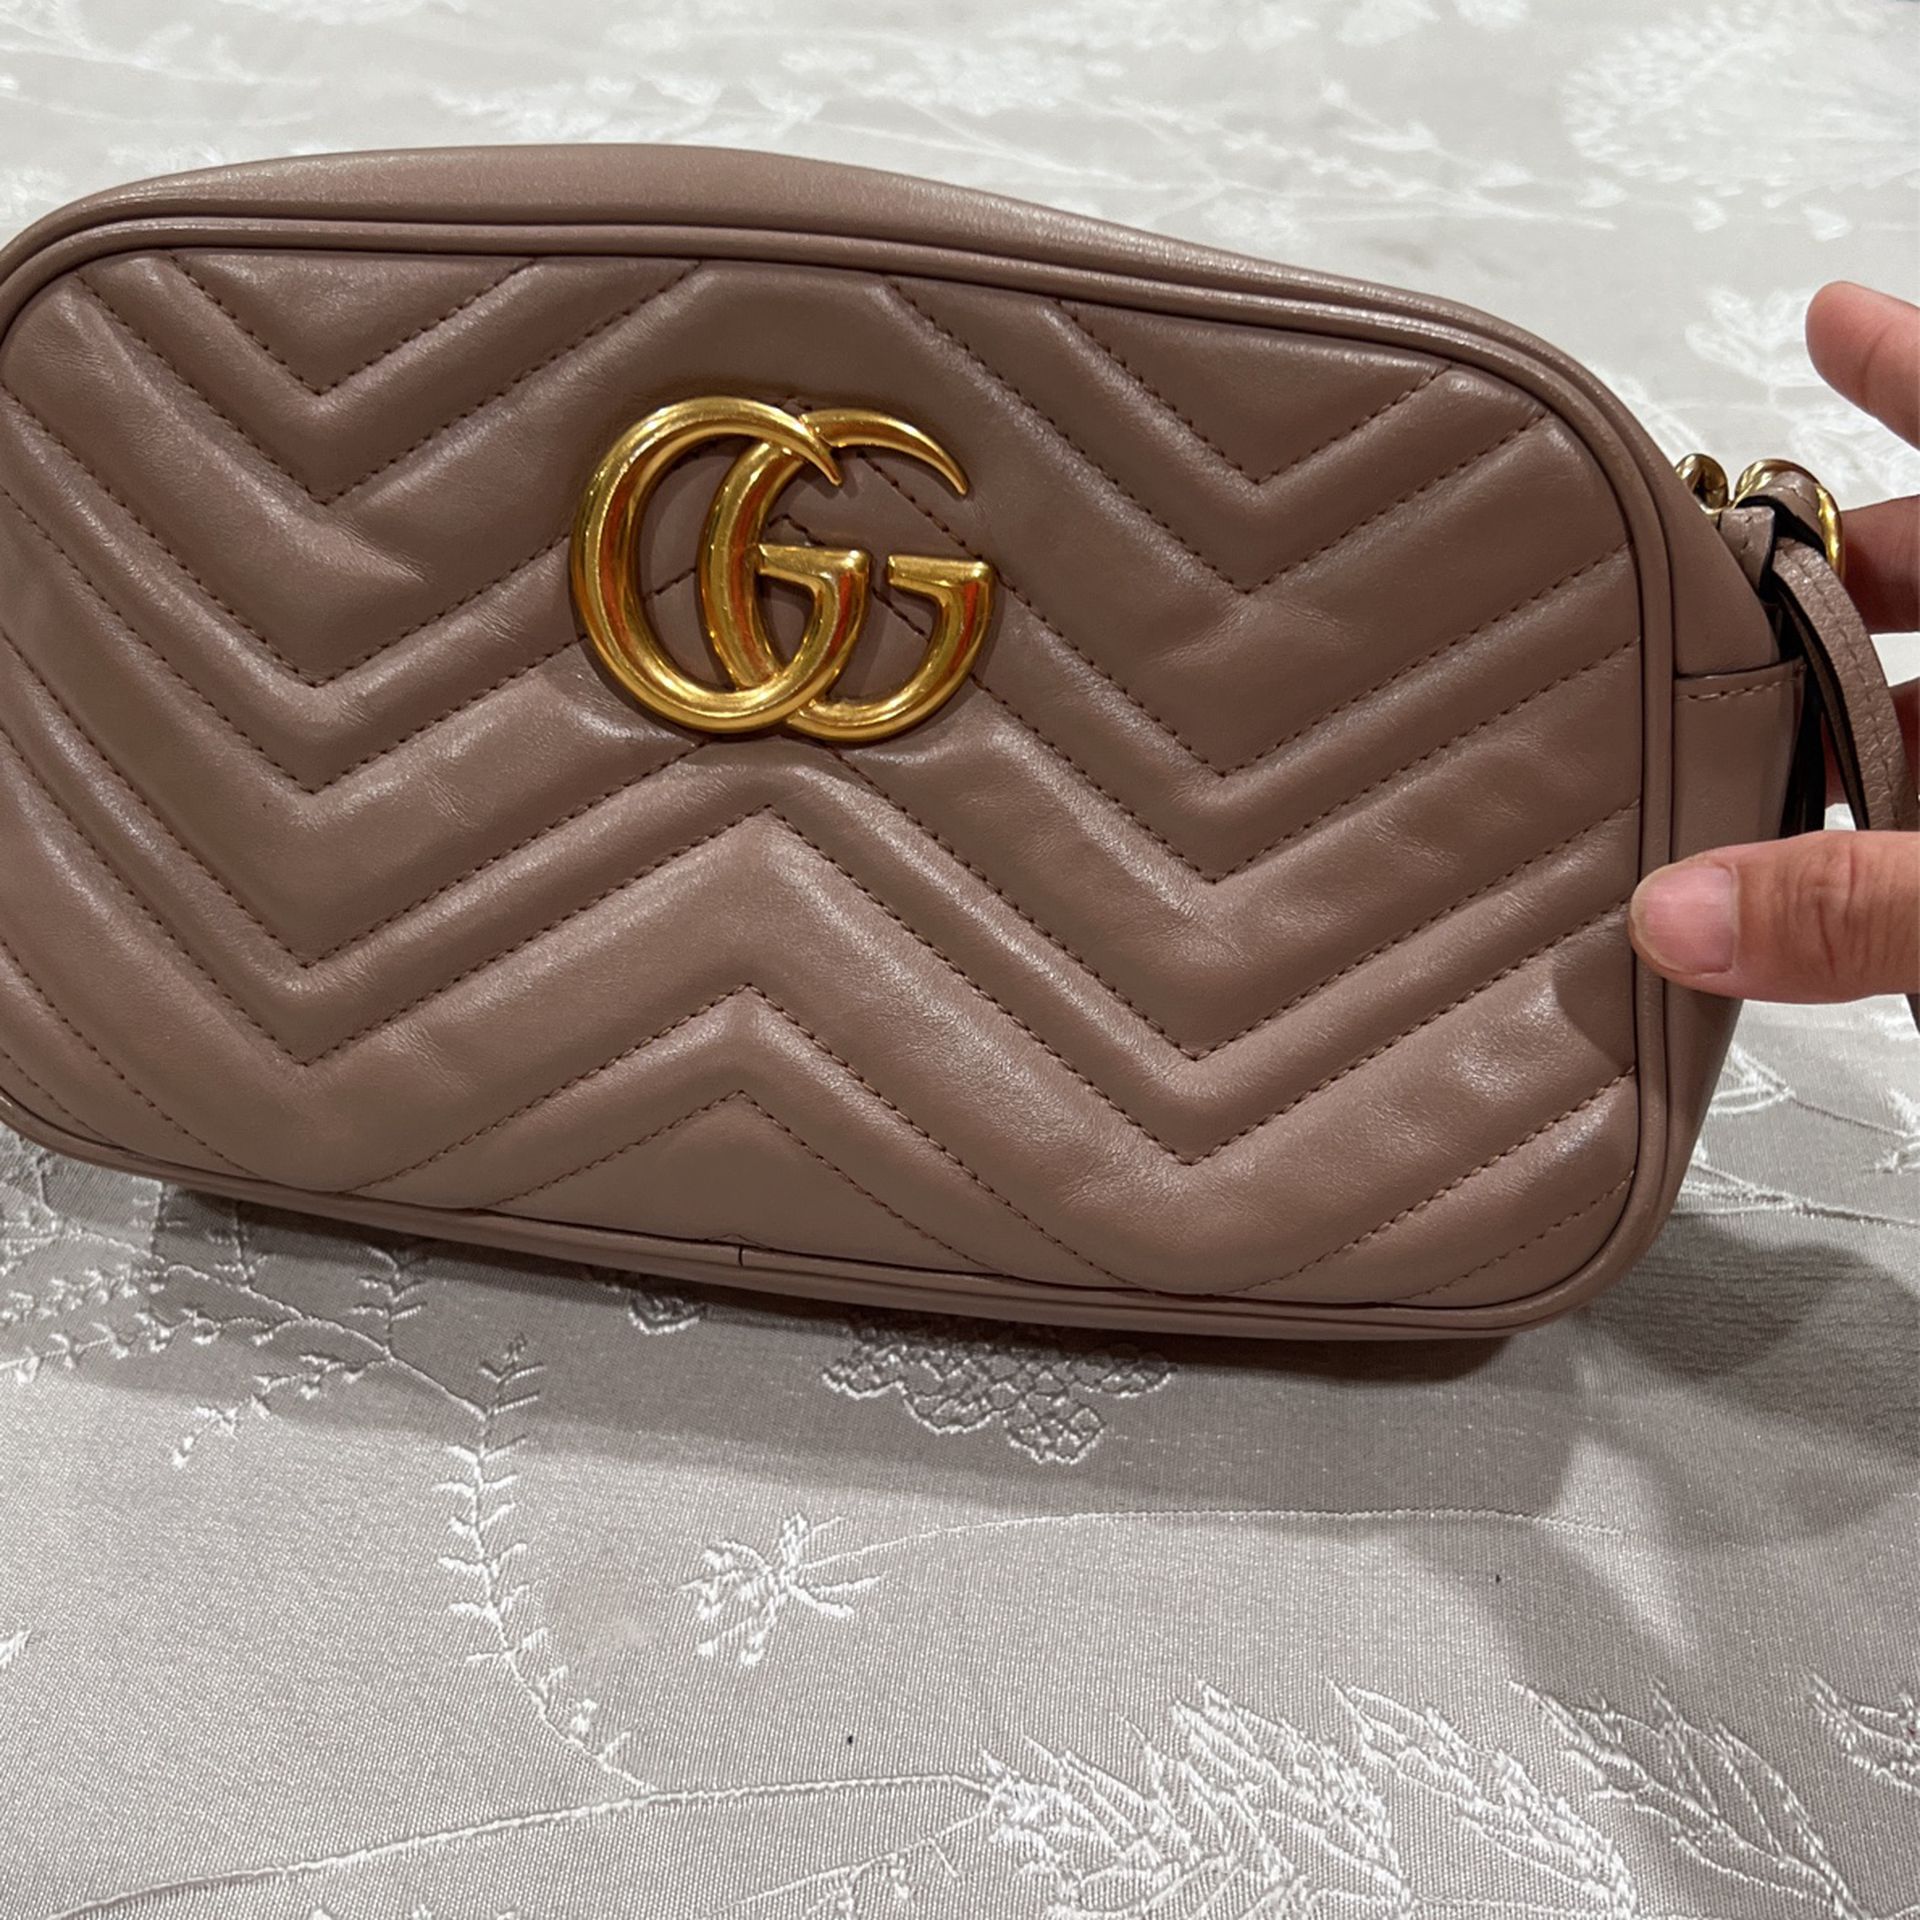 Gucci Marmont Small Only Bag No Receipt Pick Up Only 💯authentic! 